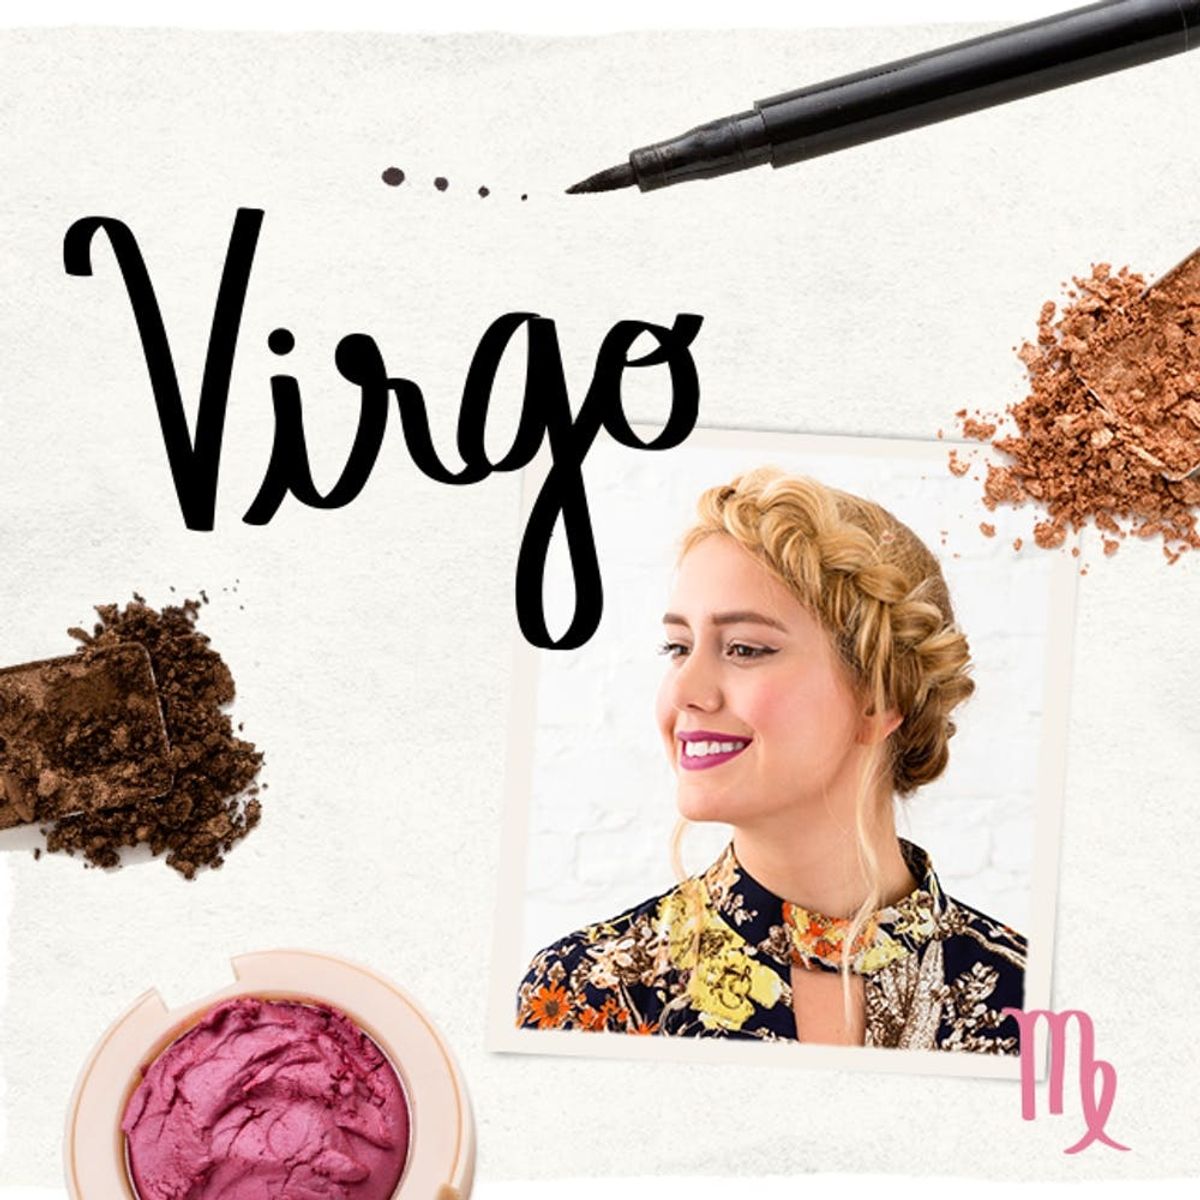 The Best Makeup for Your Zodiac Sign: Virgo Edition